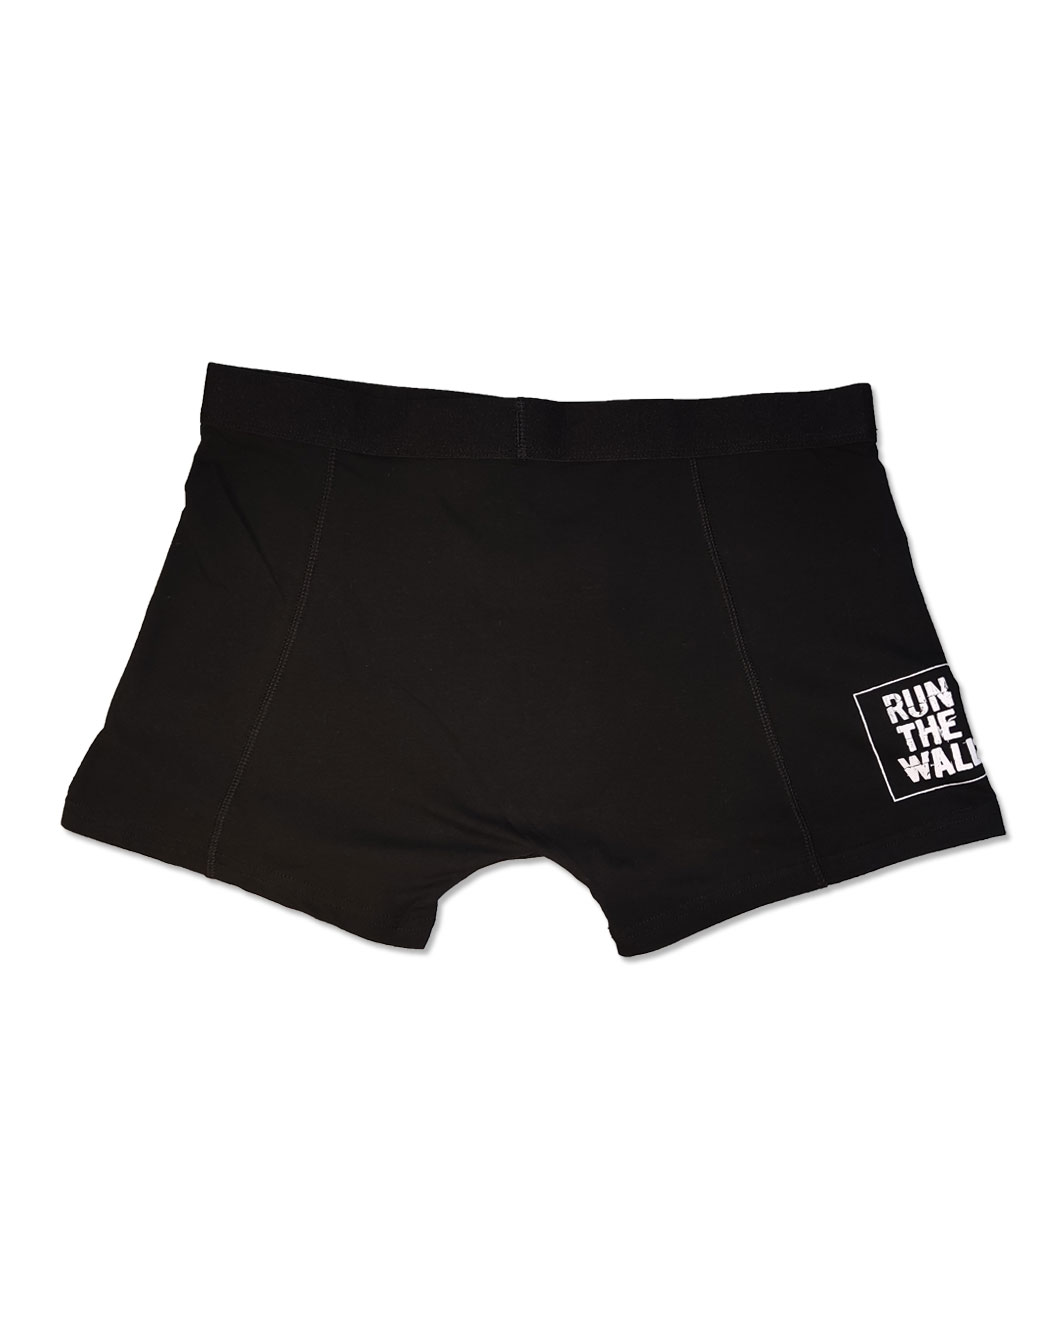 Underwear - Run the wall - clothing to